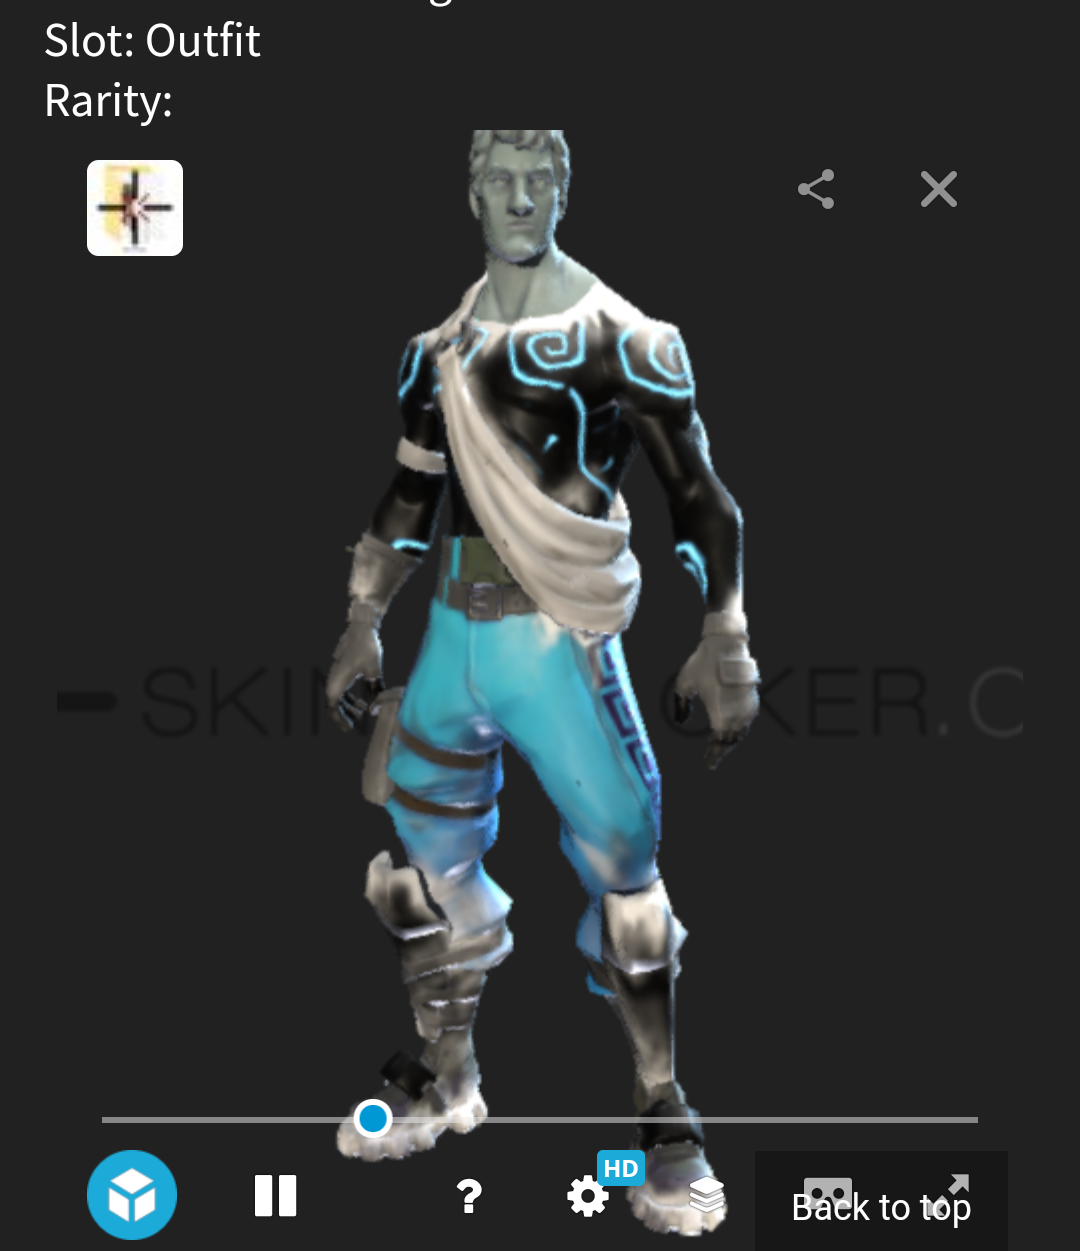 A new leak shows us a new version of the Love Ranger skin for winter.